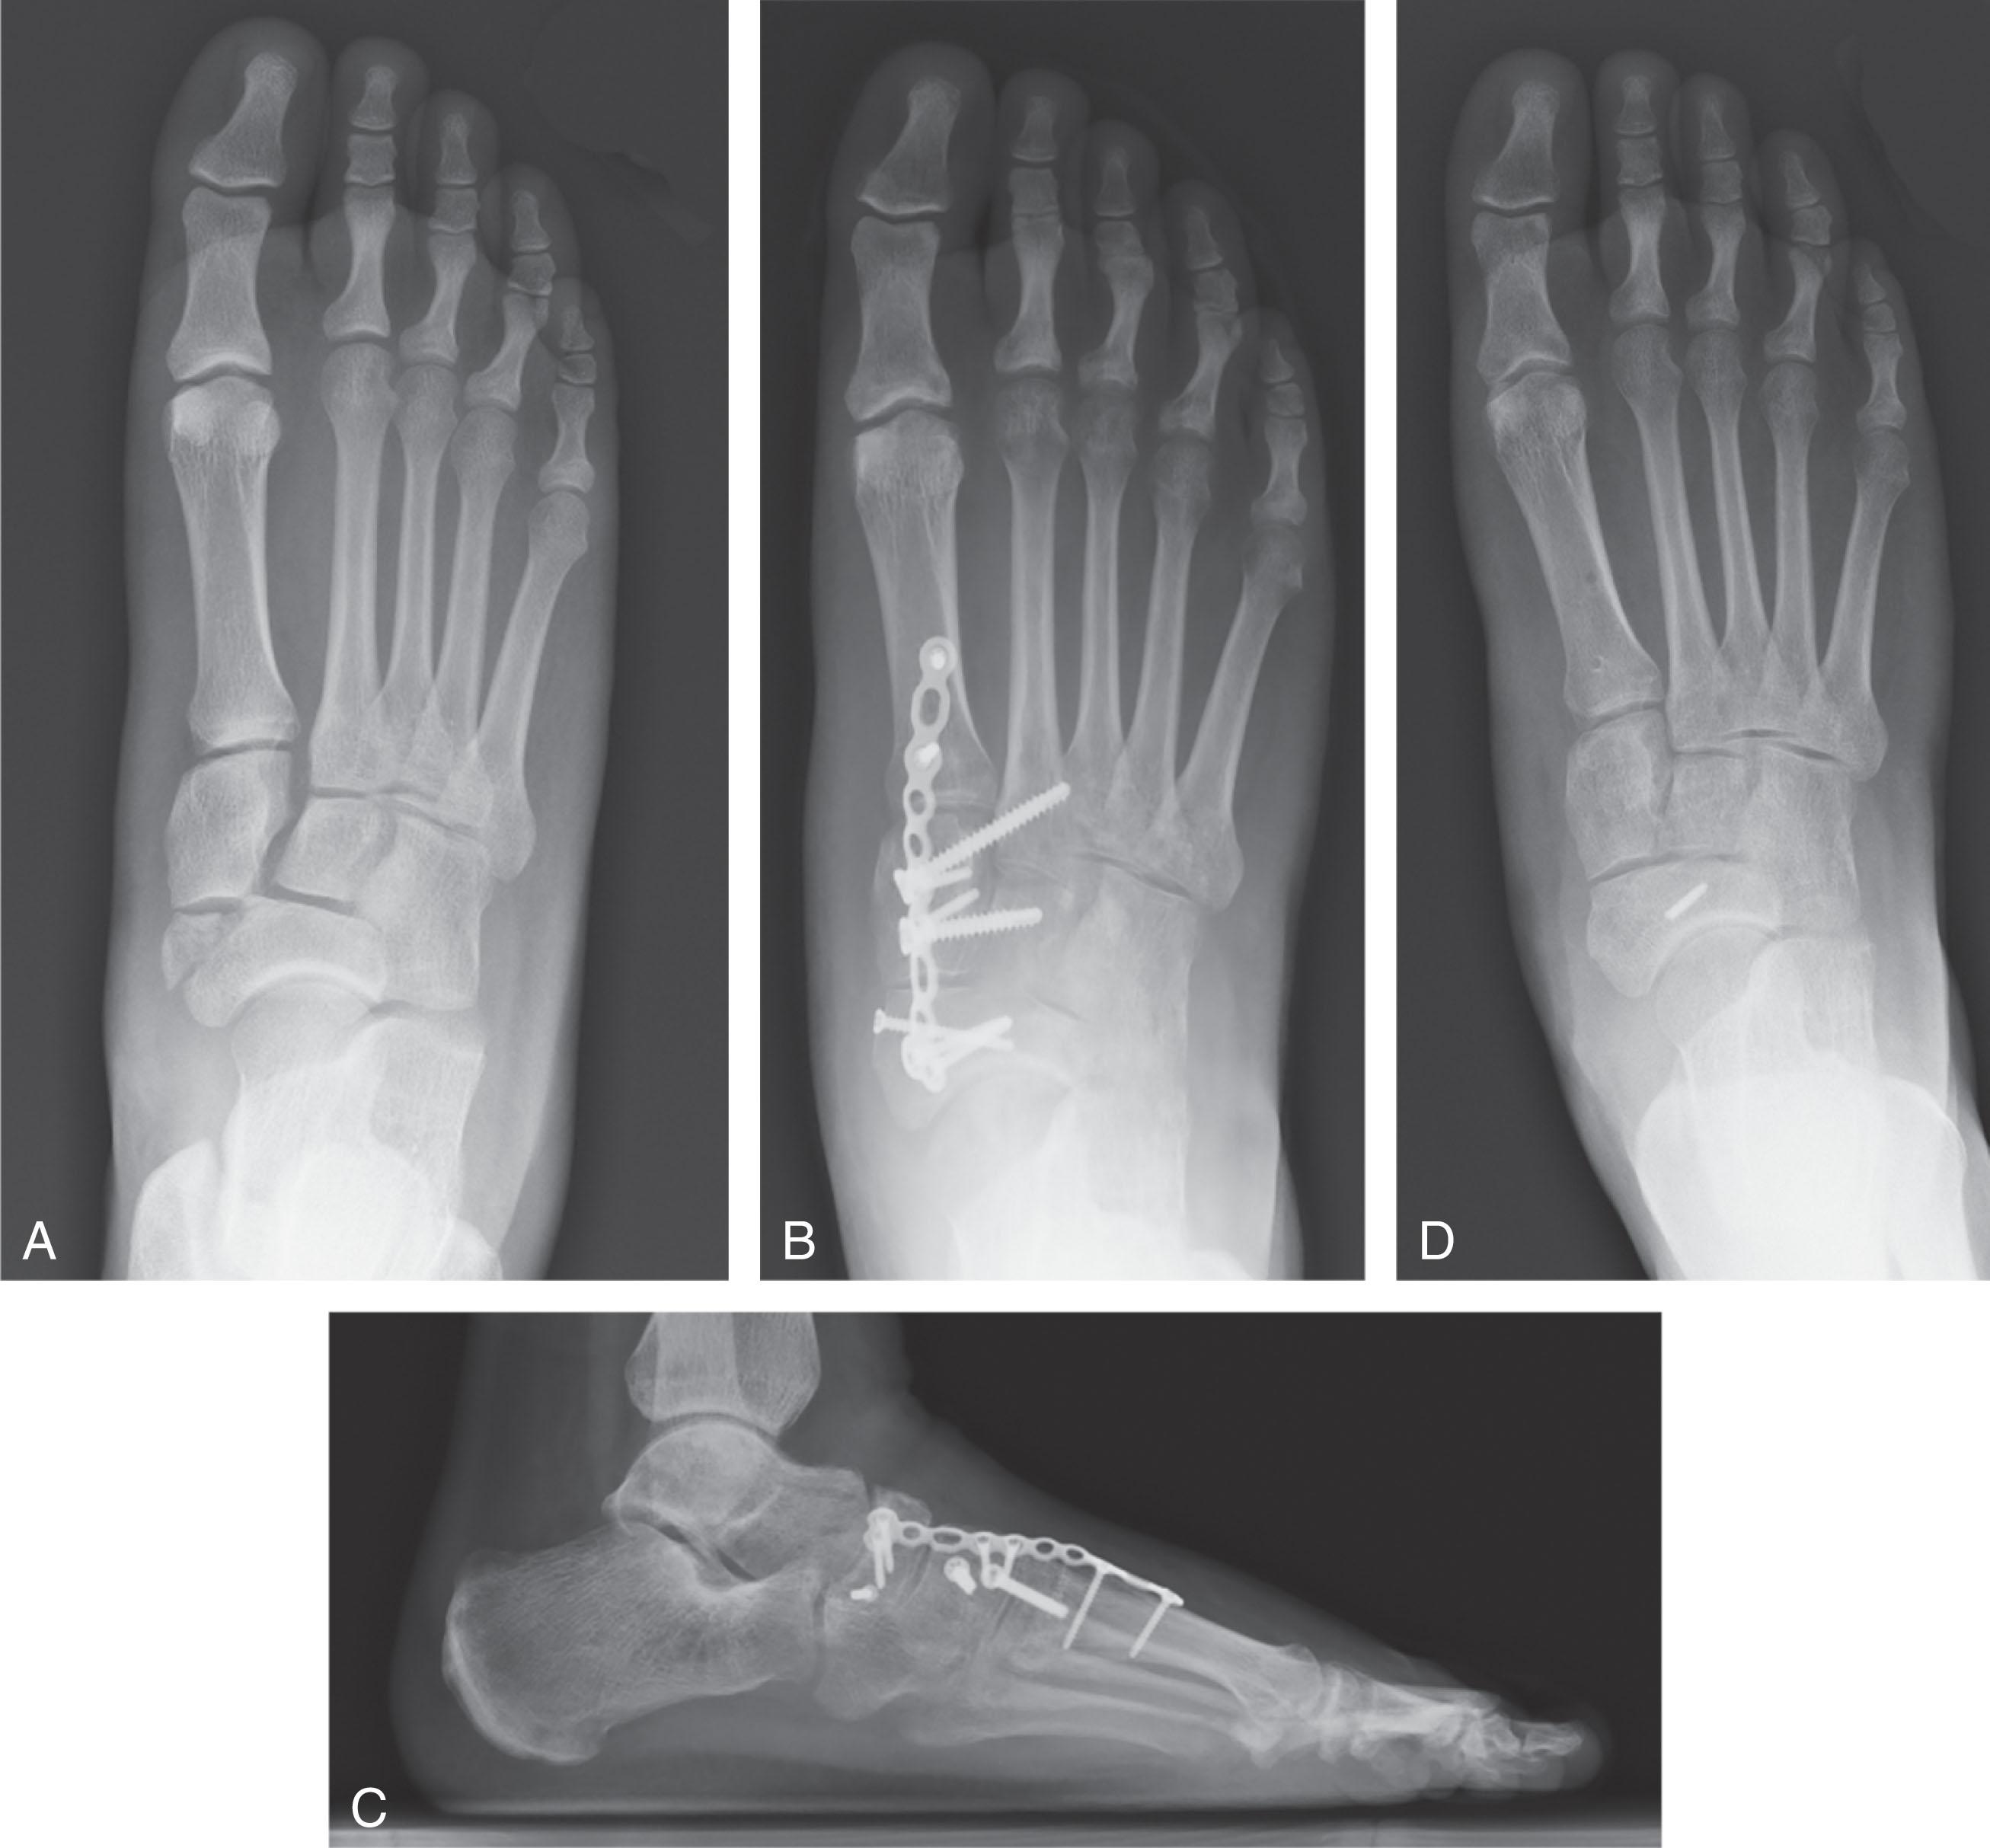 Fig. 47-7, Complete medial column instability propagating proximally with shortening and diastasis through a sheer fracture of the tarsal navicular (A) . Stability was restored with bridge plate fixation of the medial column and restoration of the medial/intermediate column relationship with screw fixation ( B and C ). Hardware removal 9 months later was performed and 1-year postinjury radiographs reveal a broken navicular screw but generalized maintenance of anatomic alignment (D) .